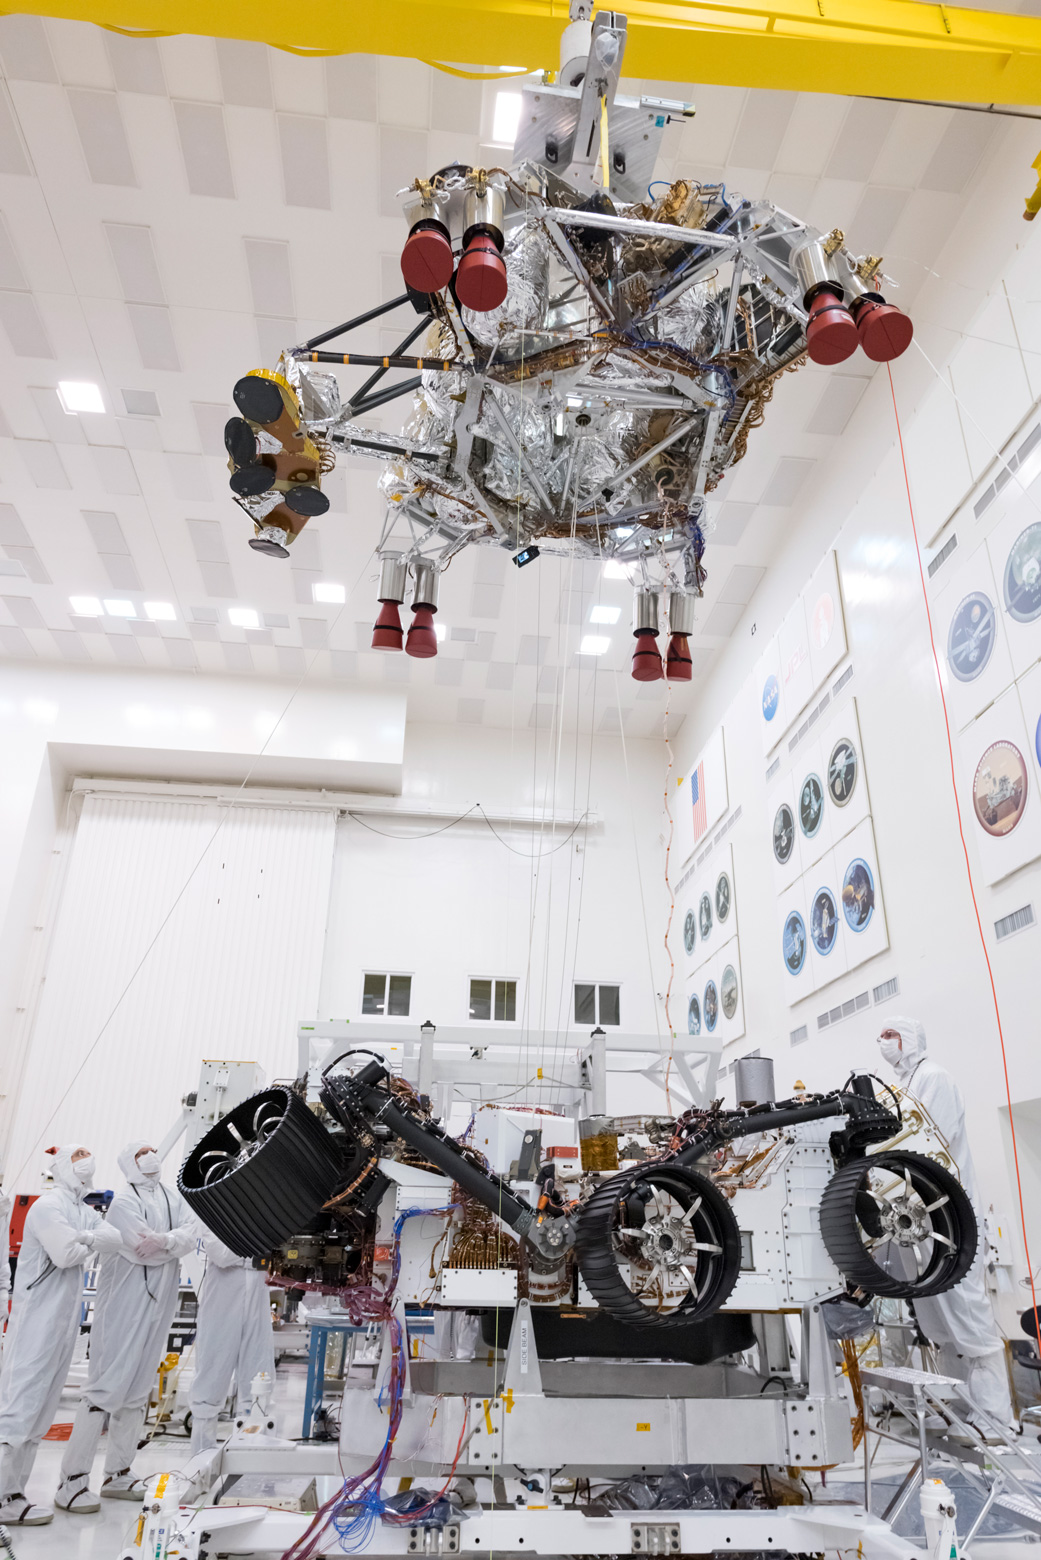 Engineers and technicians working on the Mars 2020 spacecraft look on as a crane lifts the rocket-powered descent stage away from the rover after a test.